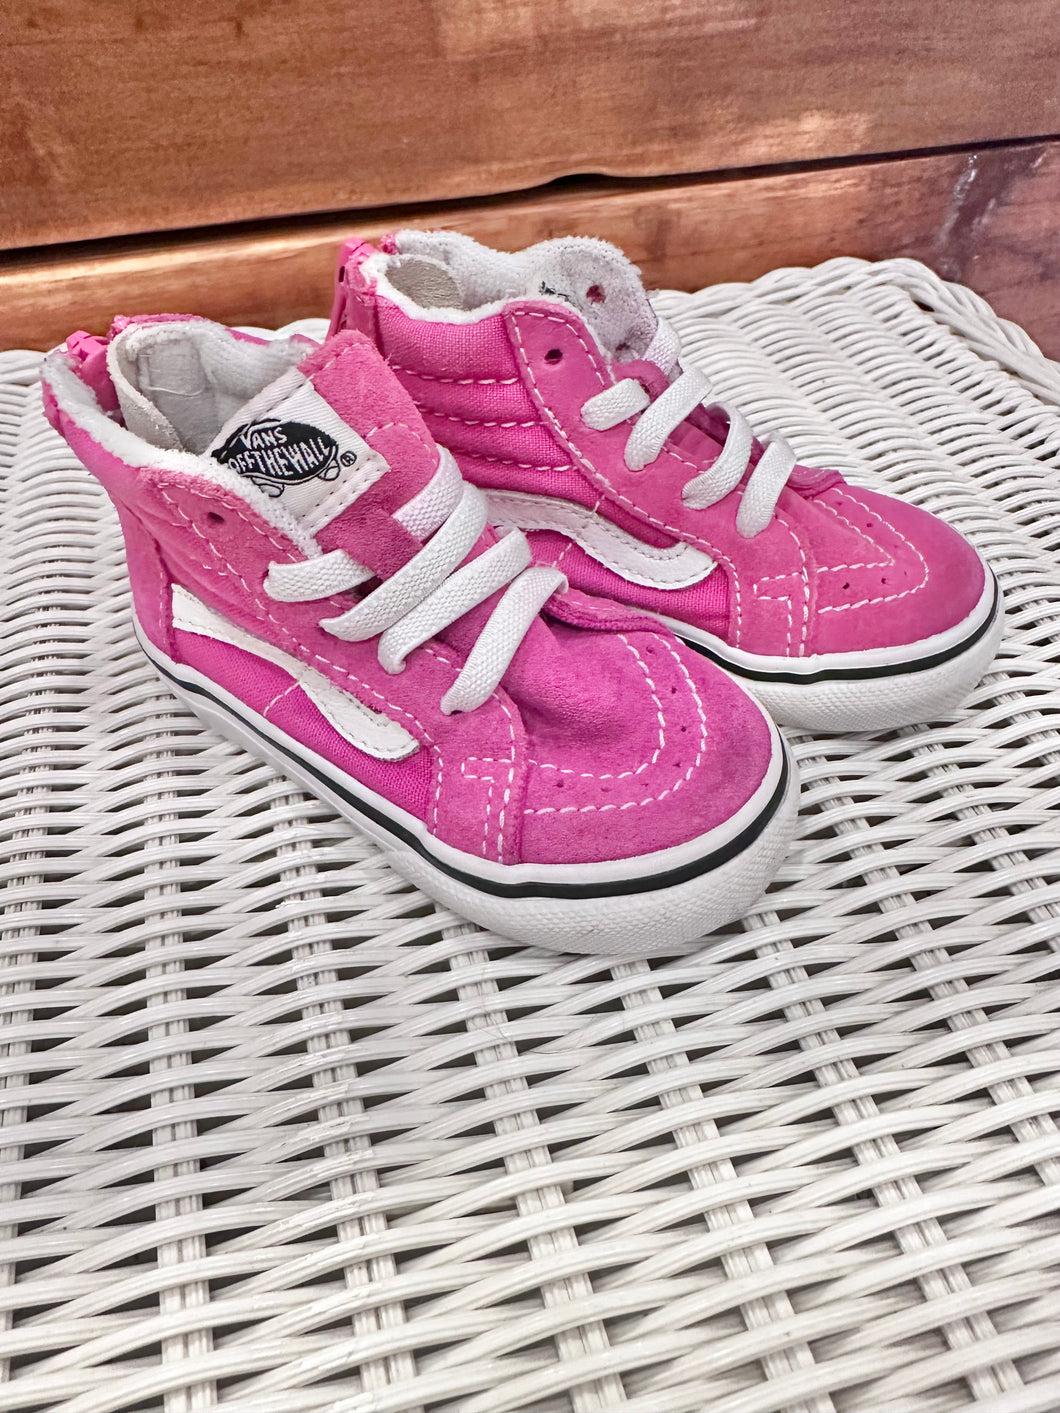 Vans Pink High Top Shoes Size 4